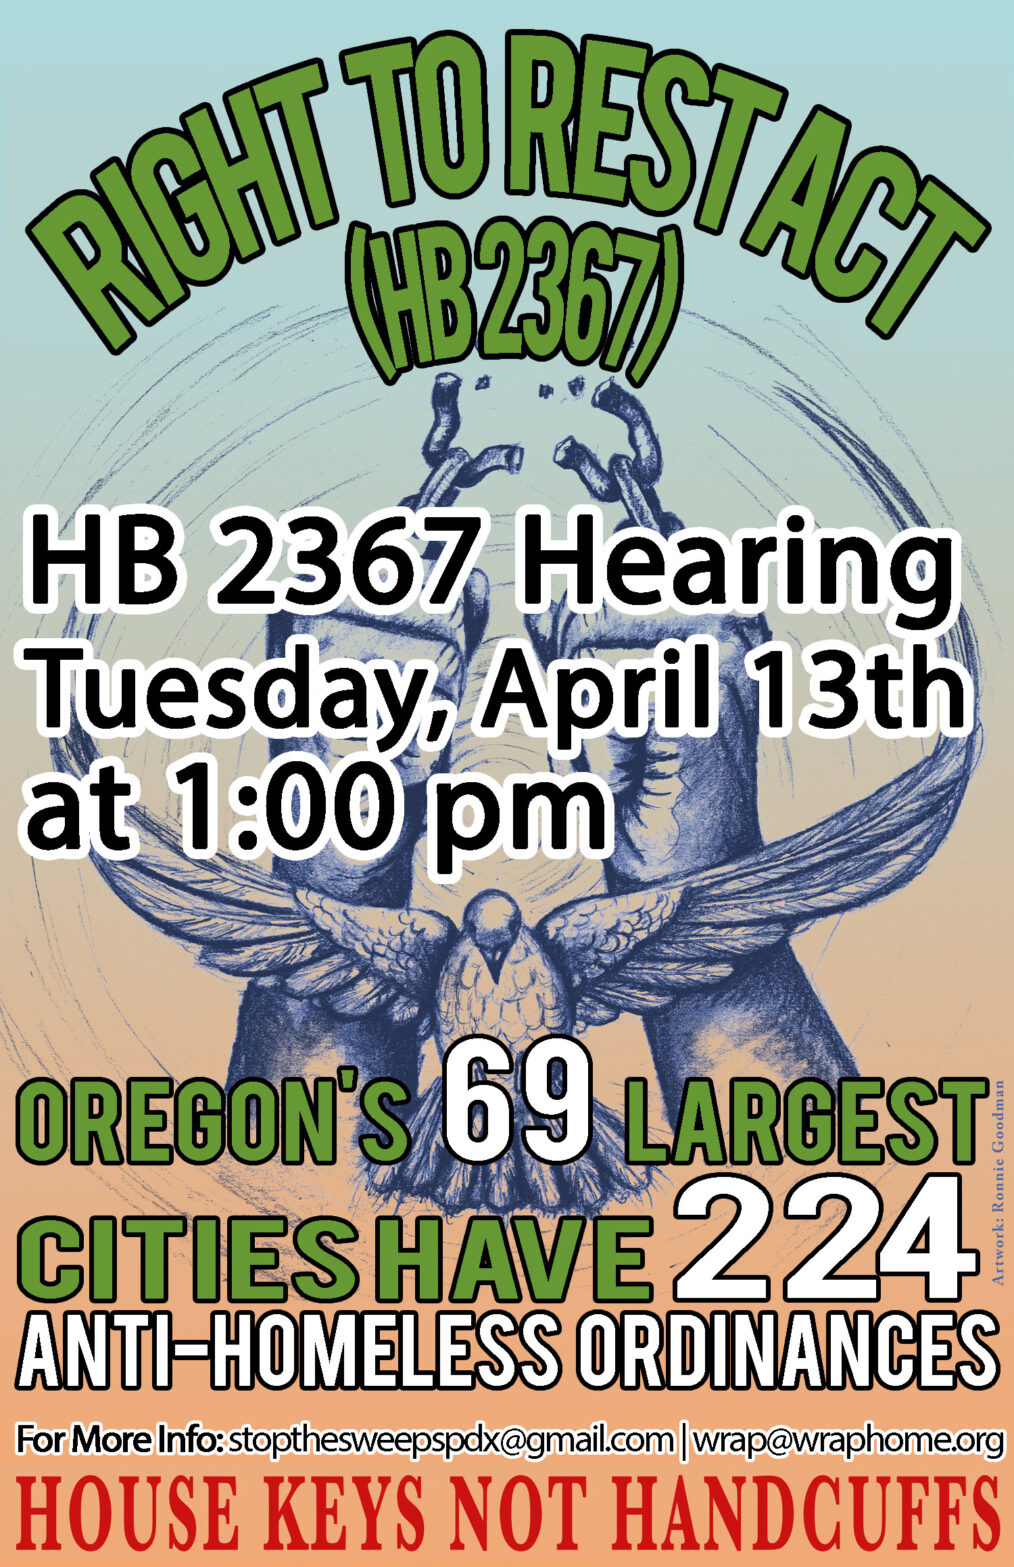 https://whitebirdclinic.org/wp-content/uploads/2021/03/HB2367-Hearing-Tuesday-April-13th-at-1pm-1014x1567.jpg